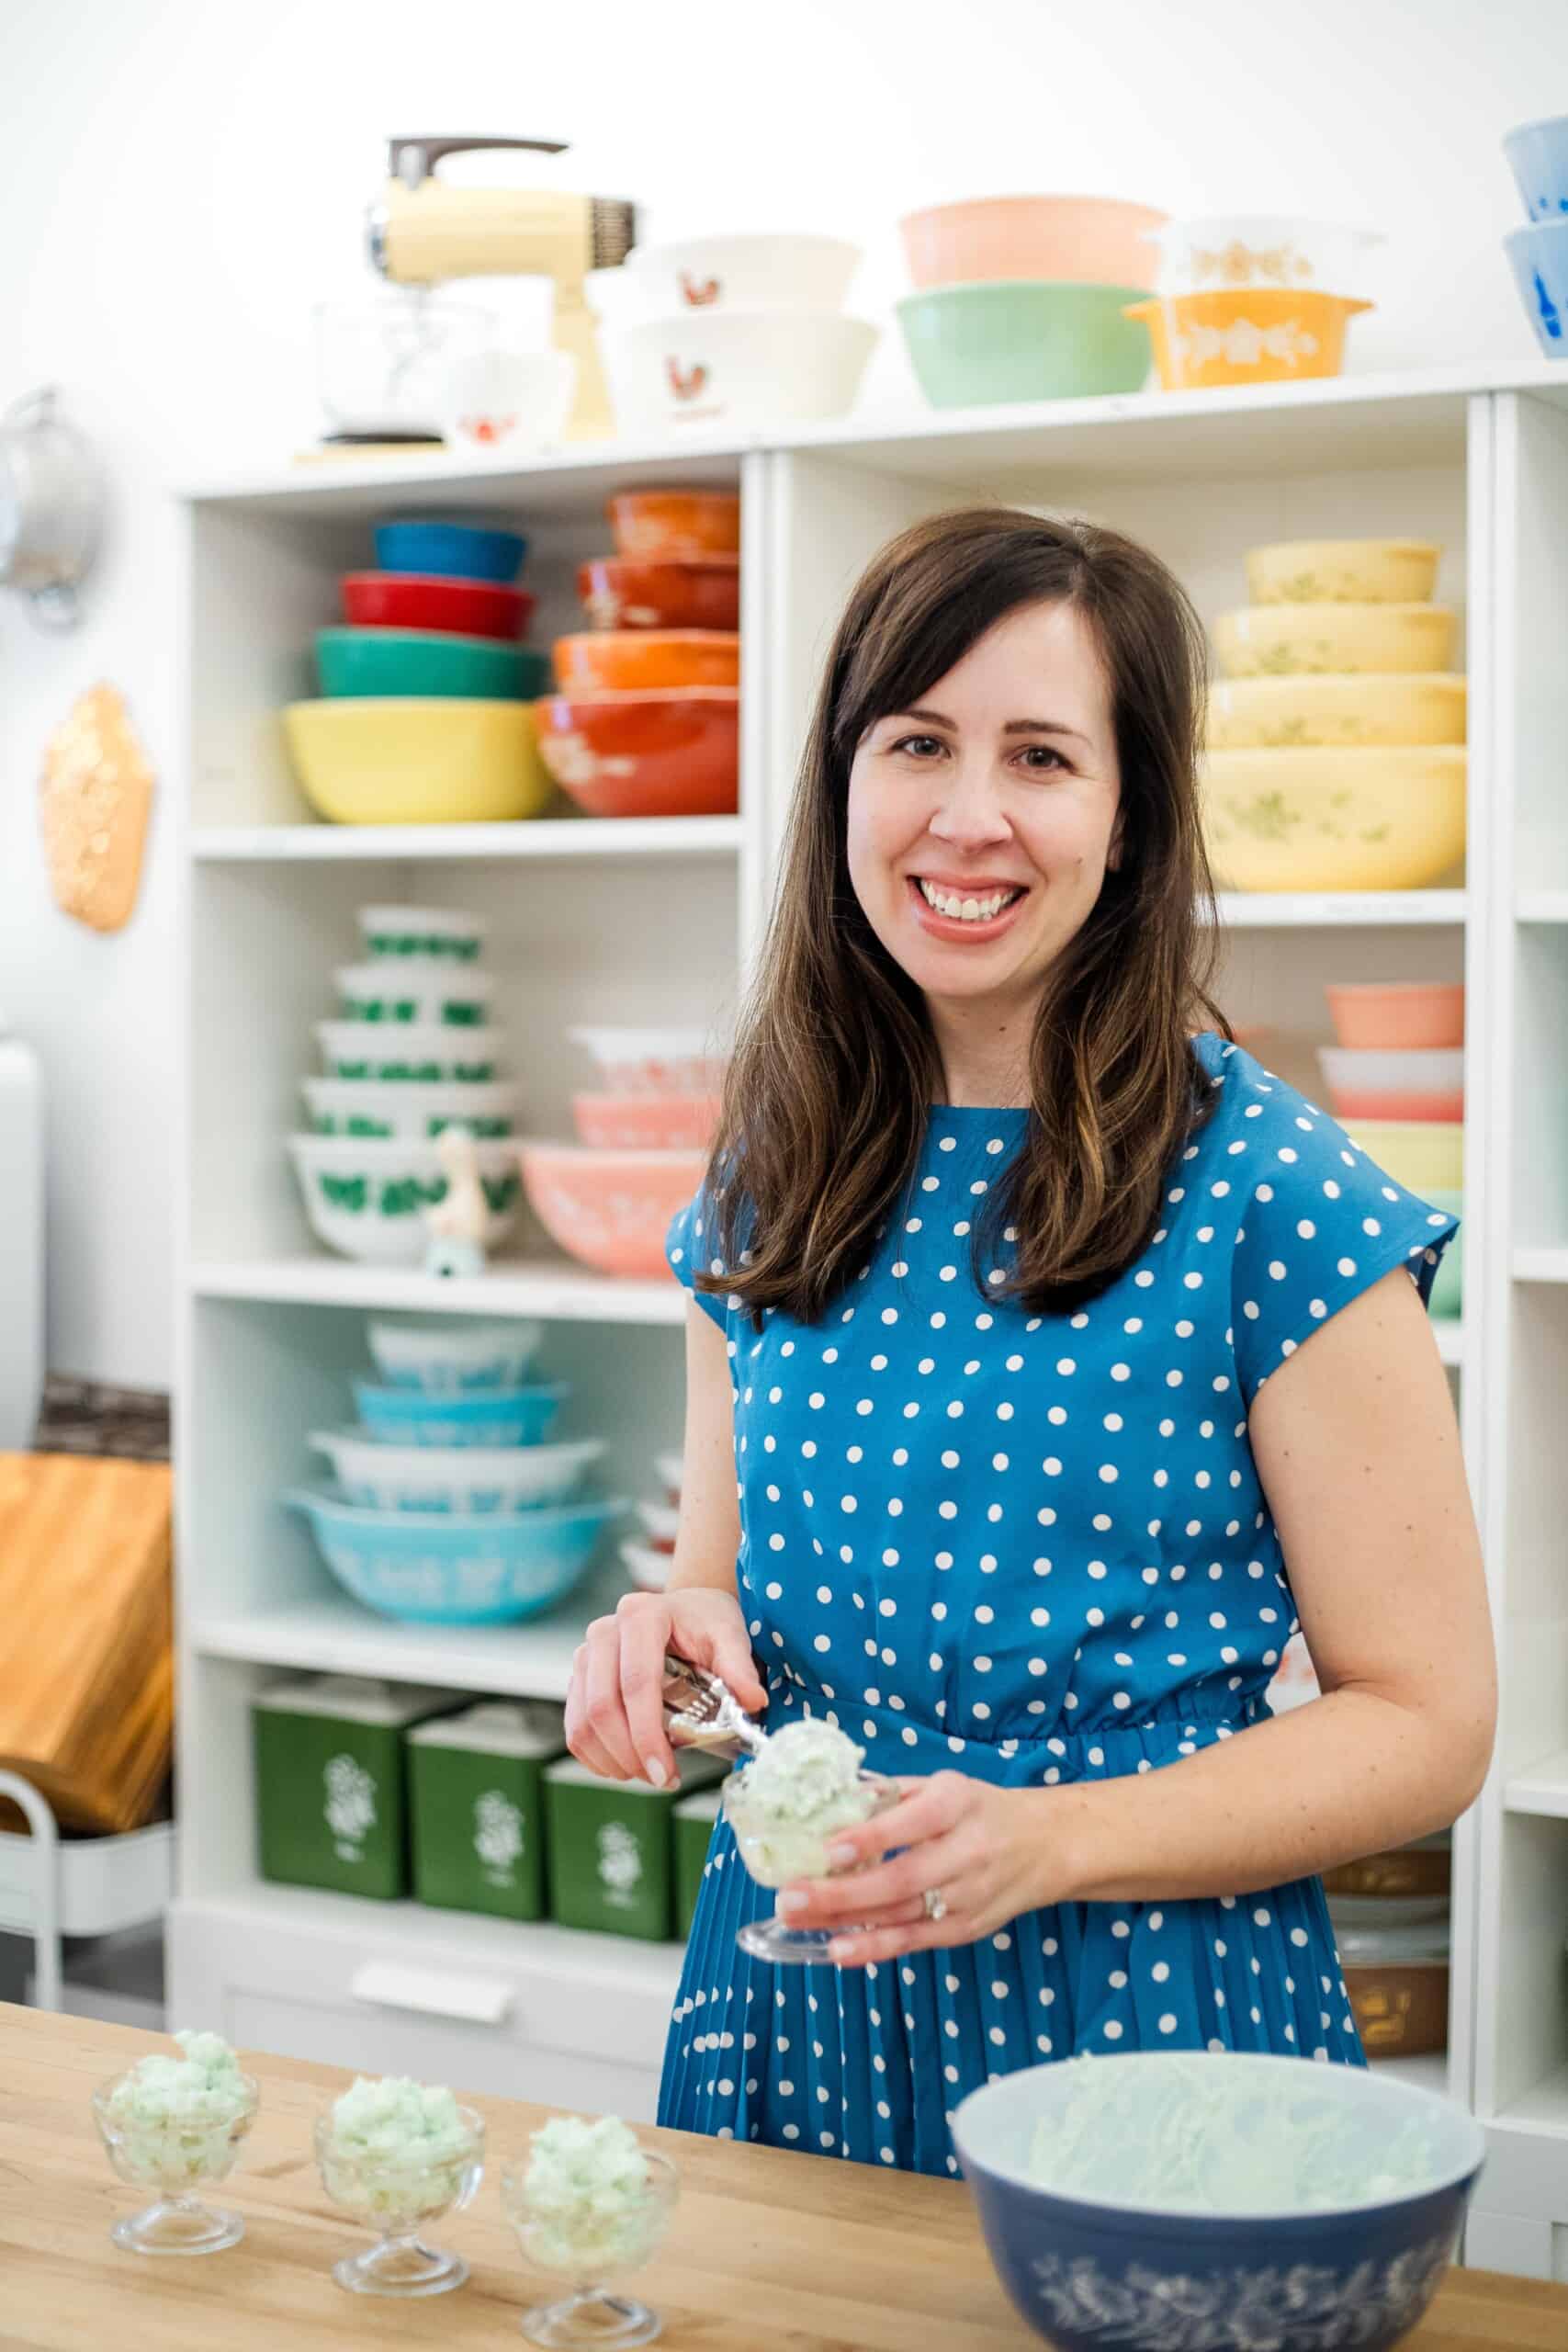 woman scooping pistachio salad into a parfait dish, with colorful vintage bowls in the background.